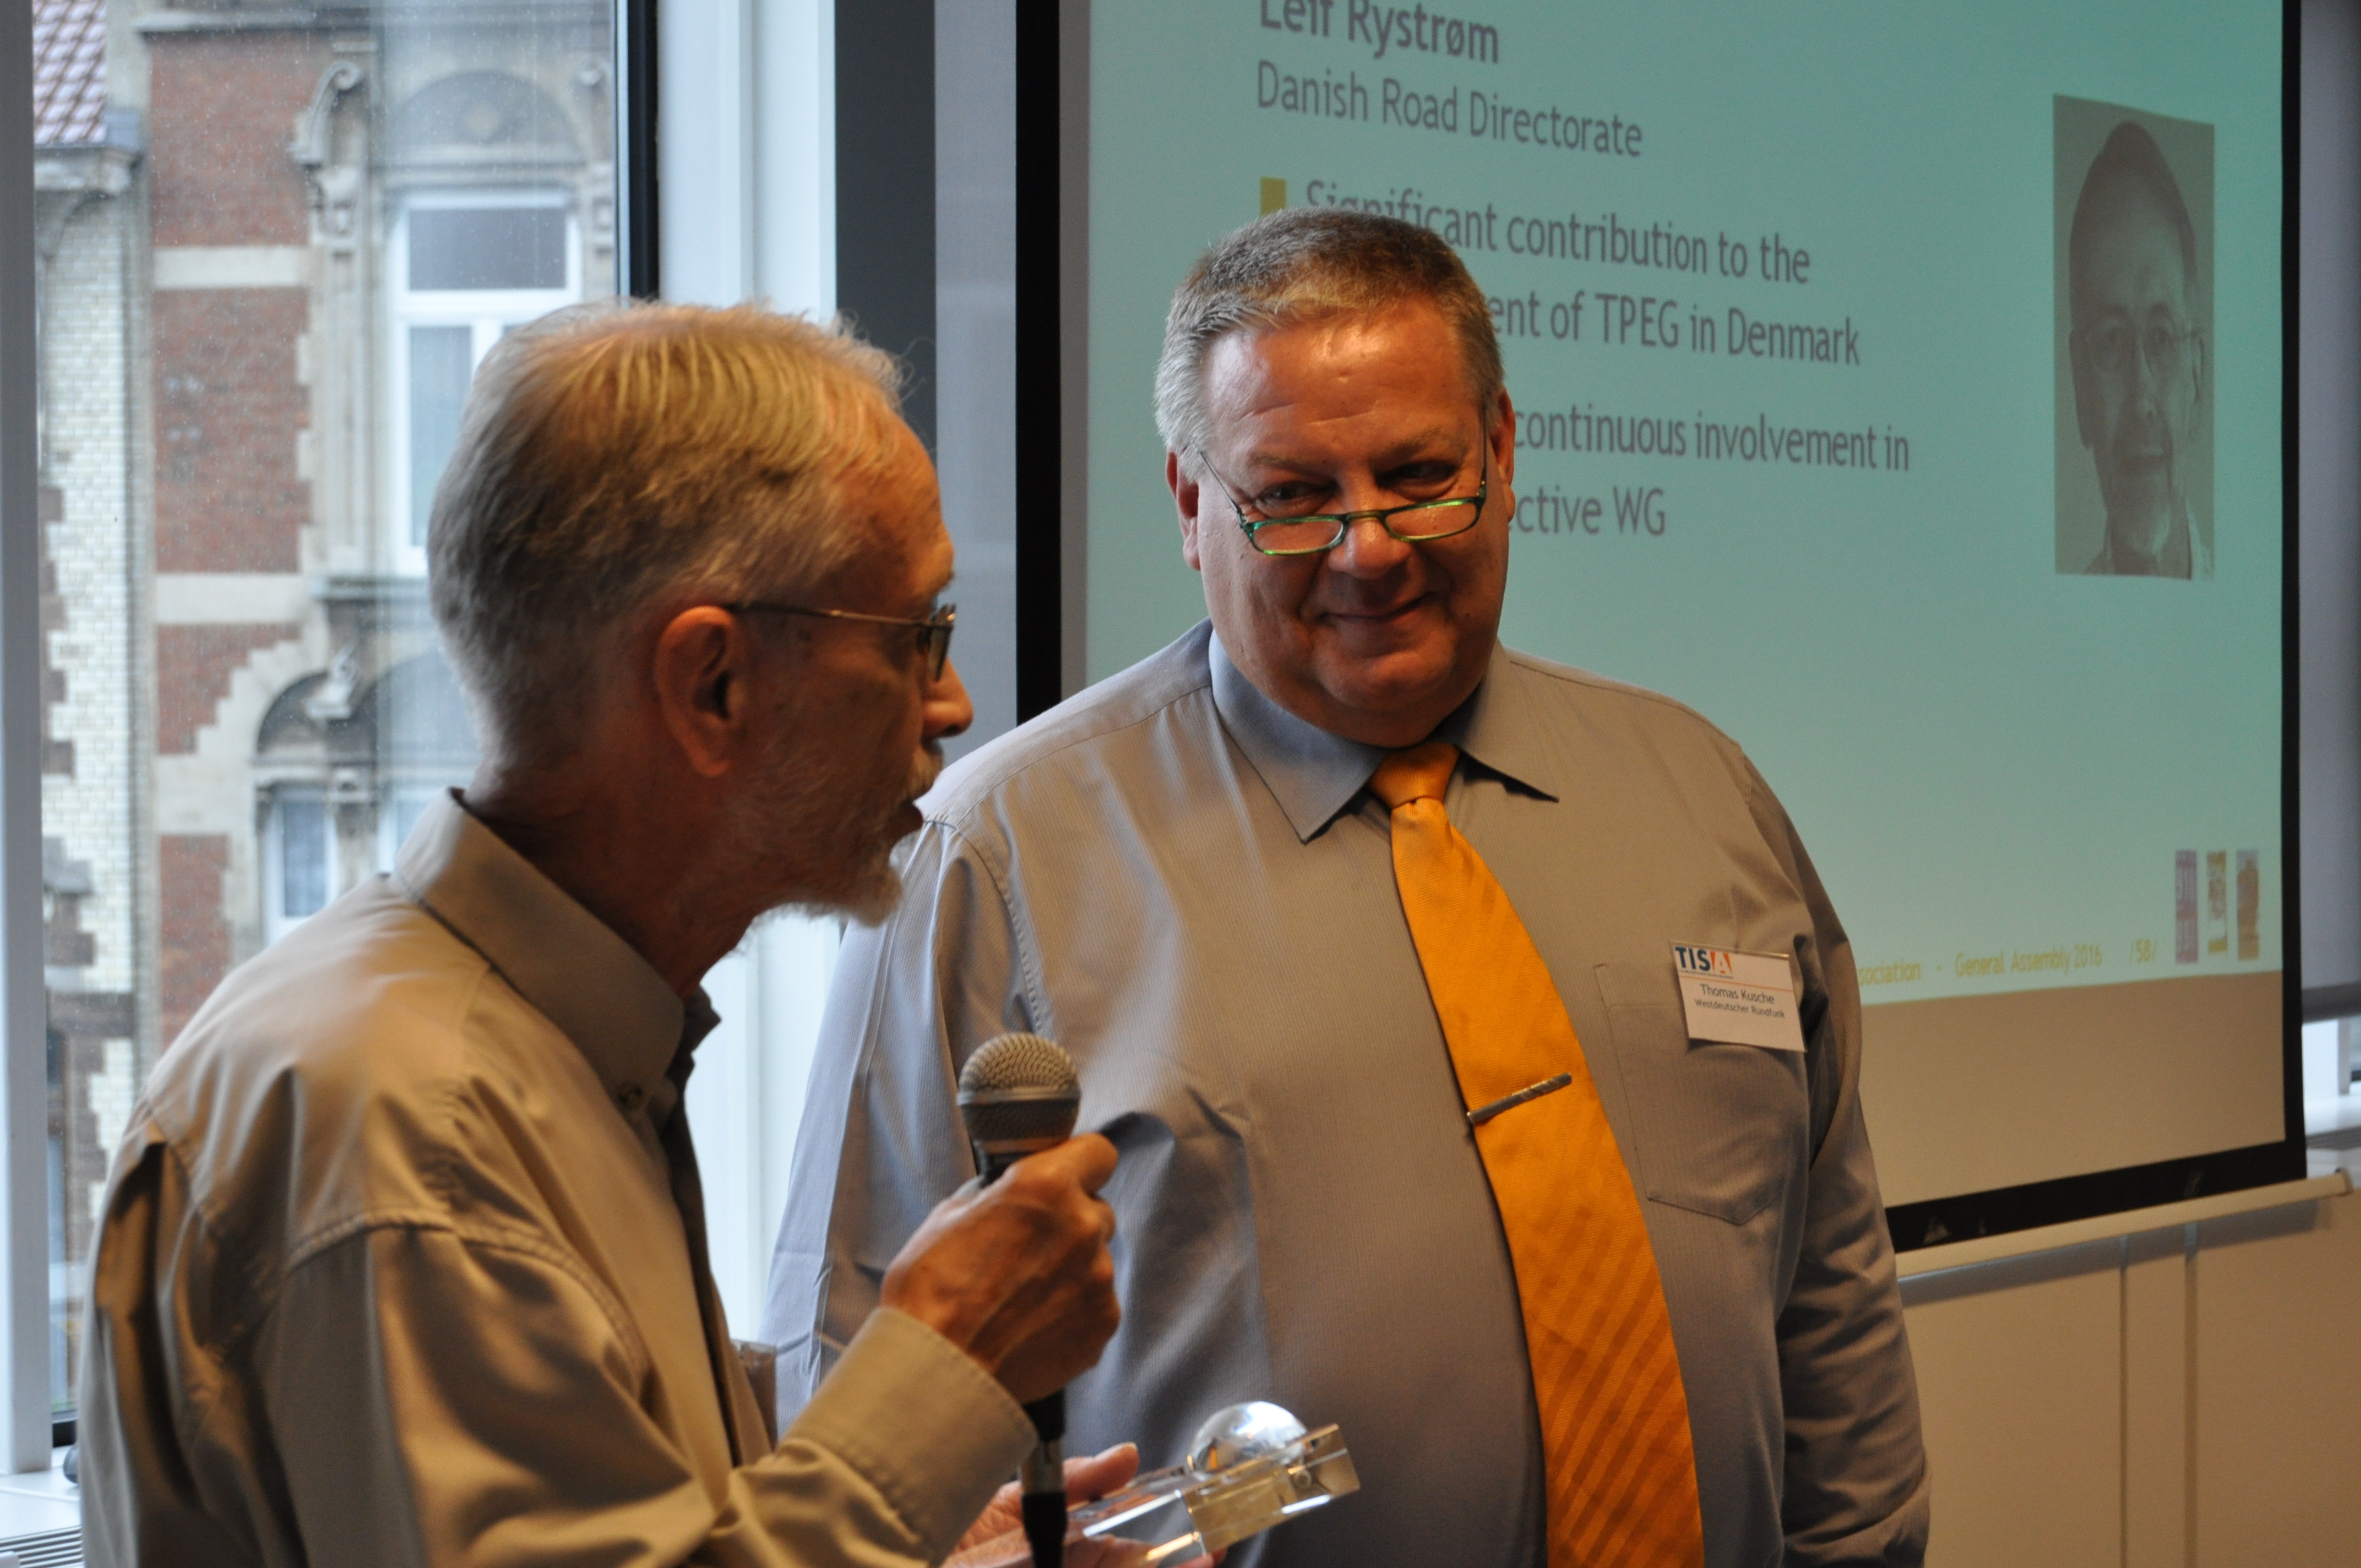 TISA hosted their annual General Assembly with Awards and keynote speaker